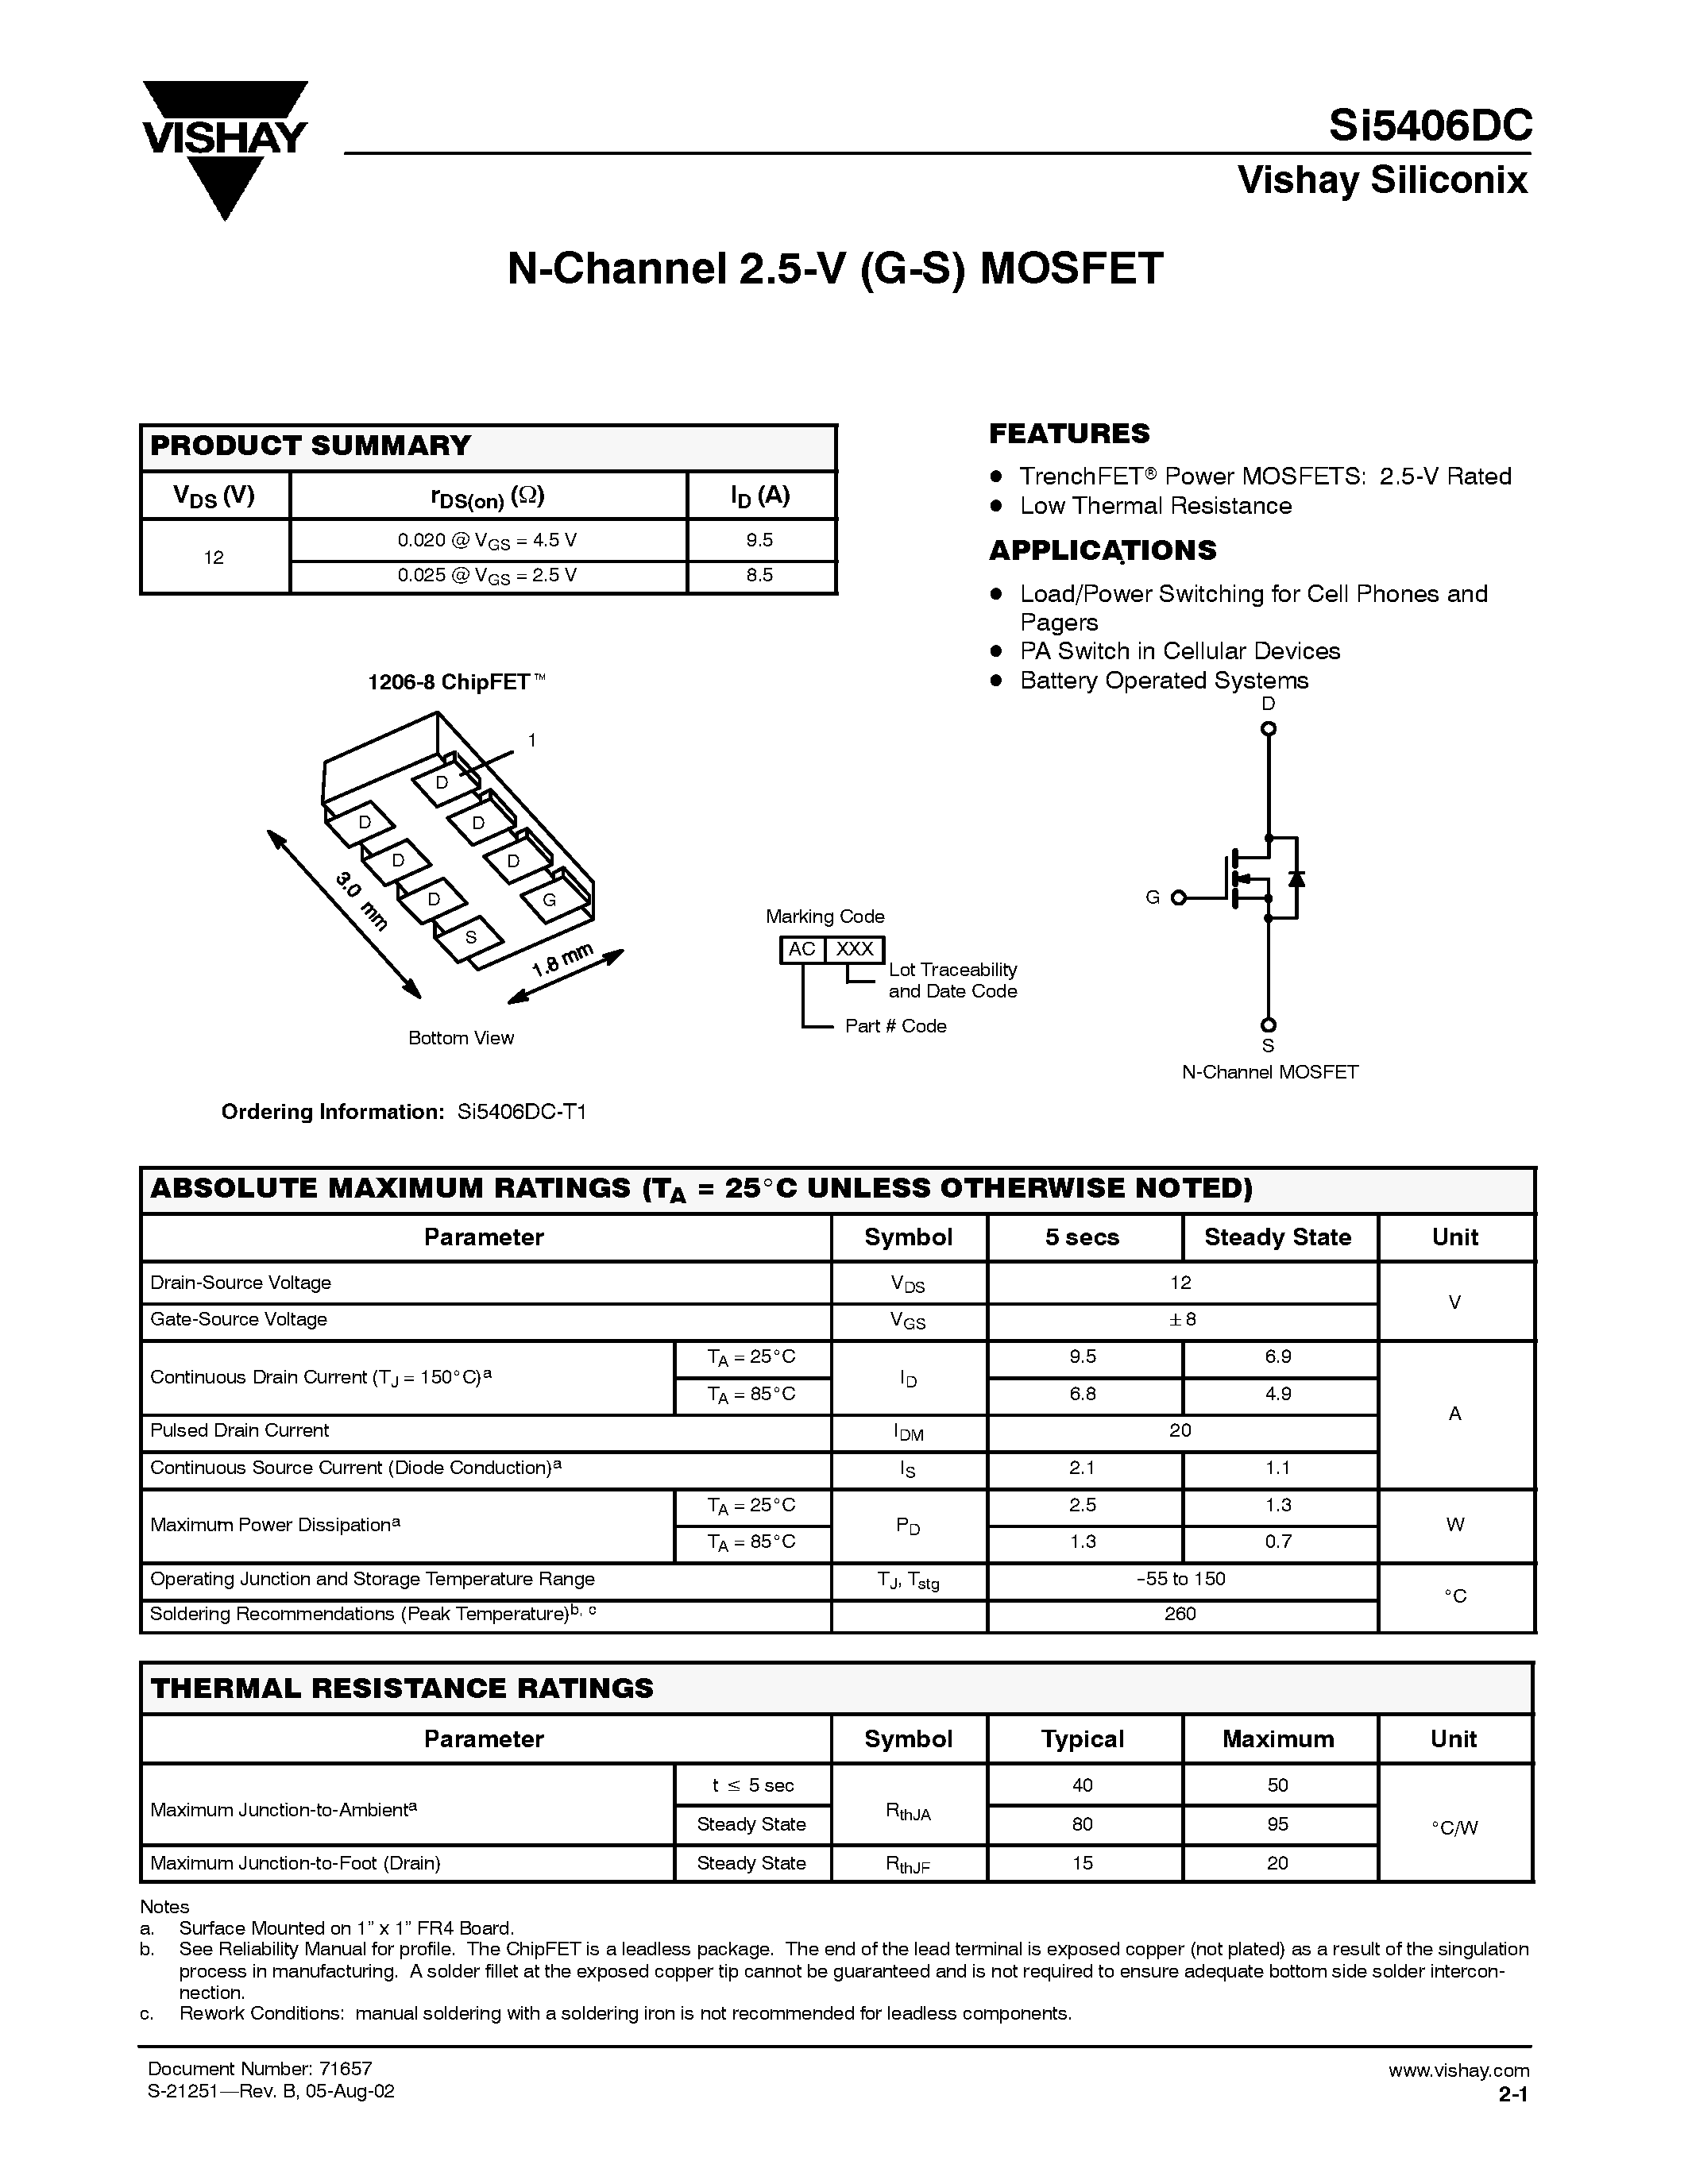 Даташит SI5406DC-T1 - N-Channel 2.5-V (G-S) MOSFET страница 1